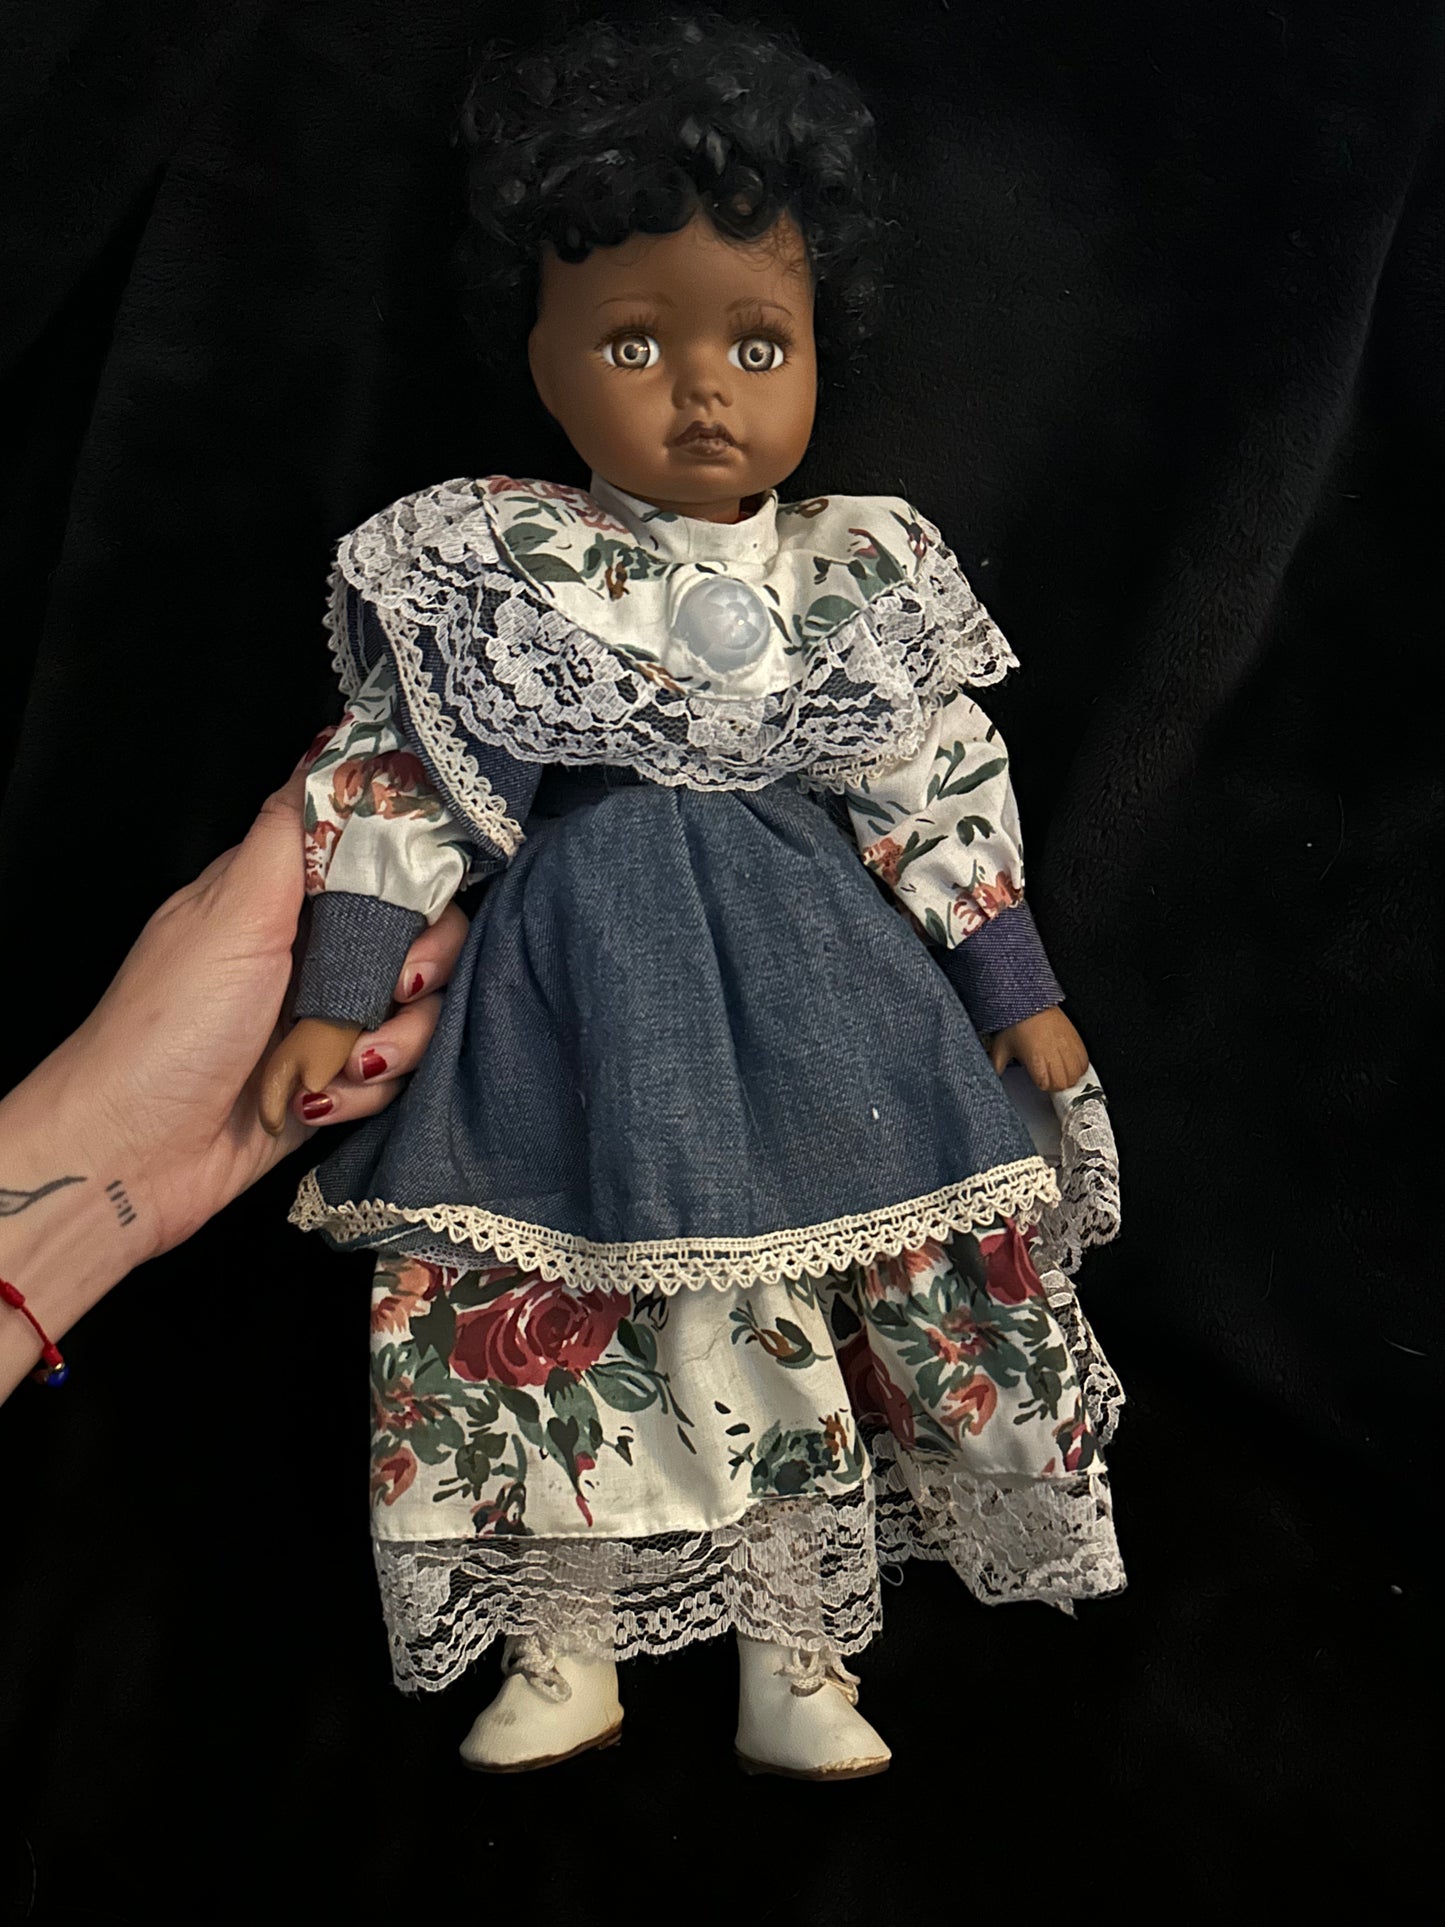 Possibly Haunted Motion Activated Doll